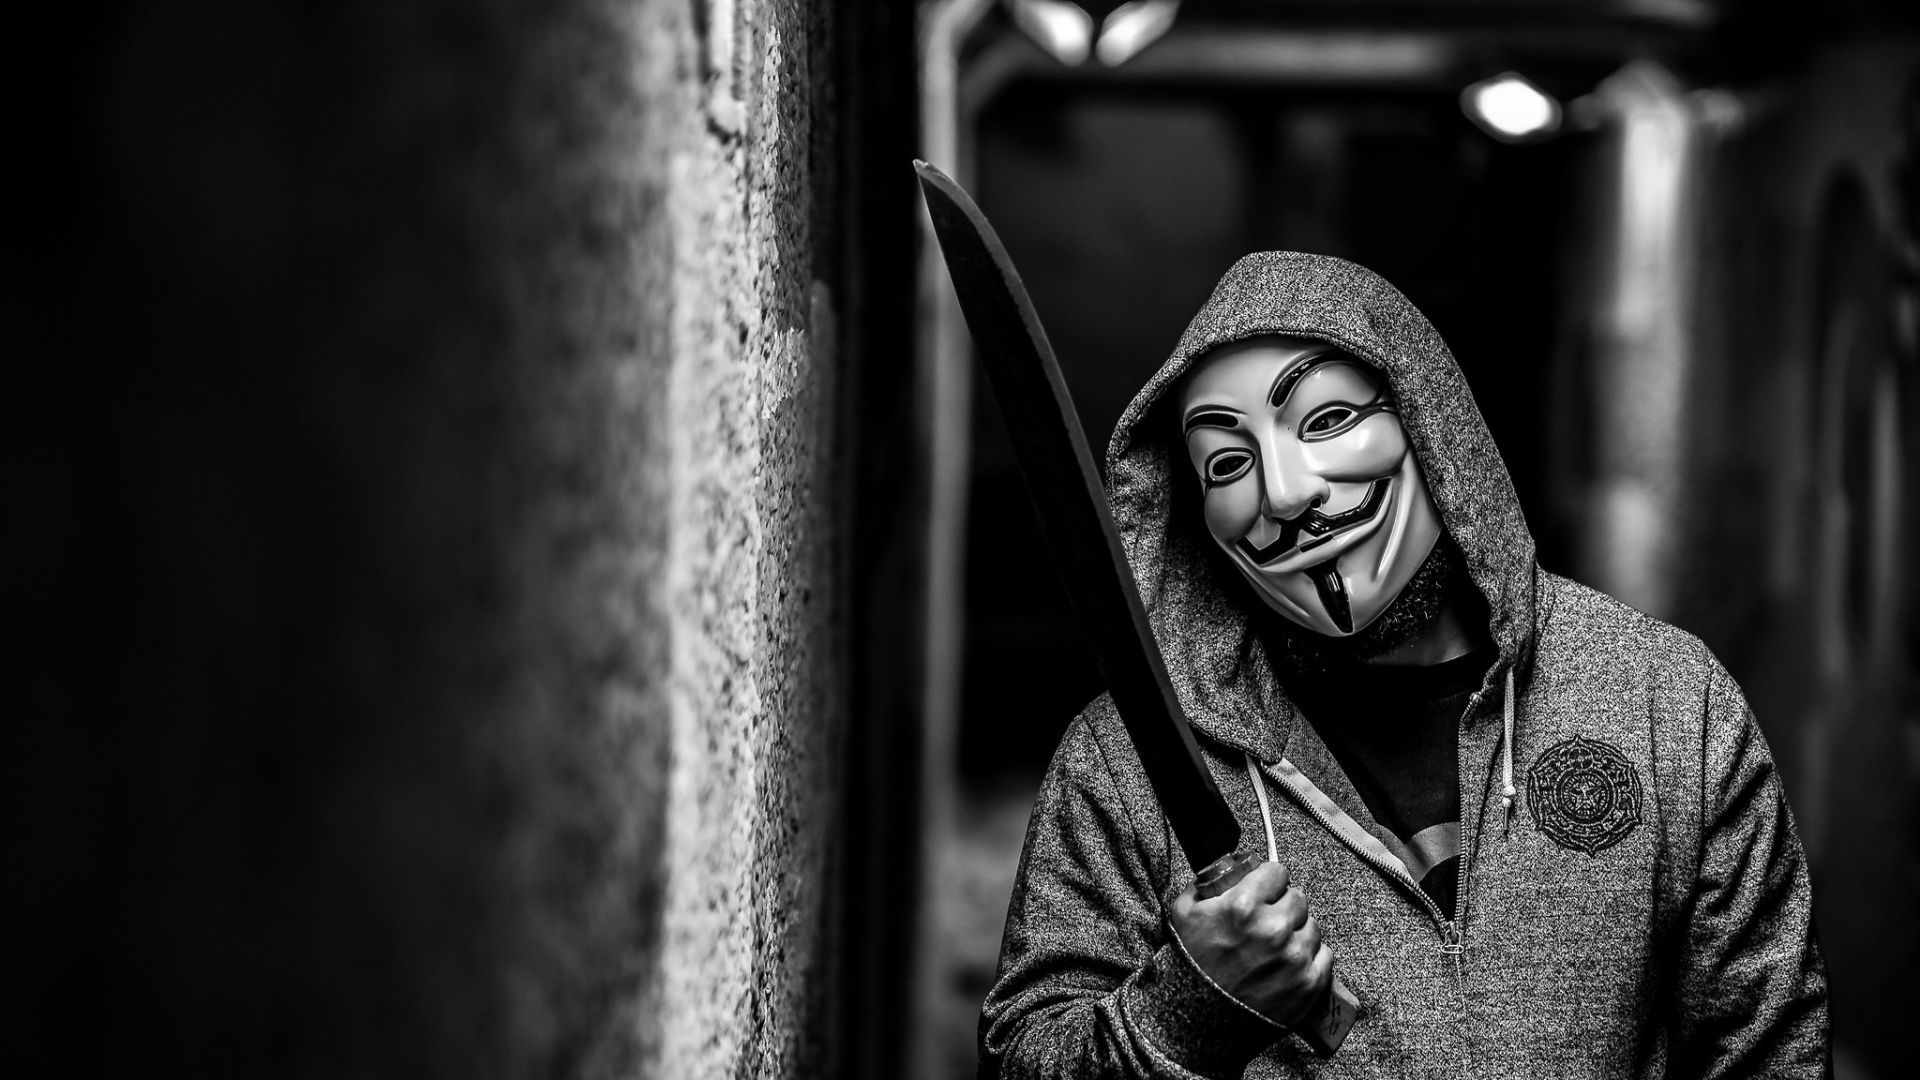 Download Wallpaper 1920x1080 Anonymous, Guy fawkes mask, Mask ...